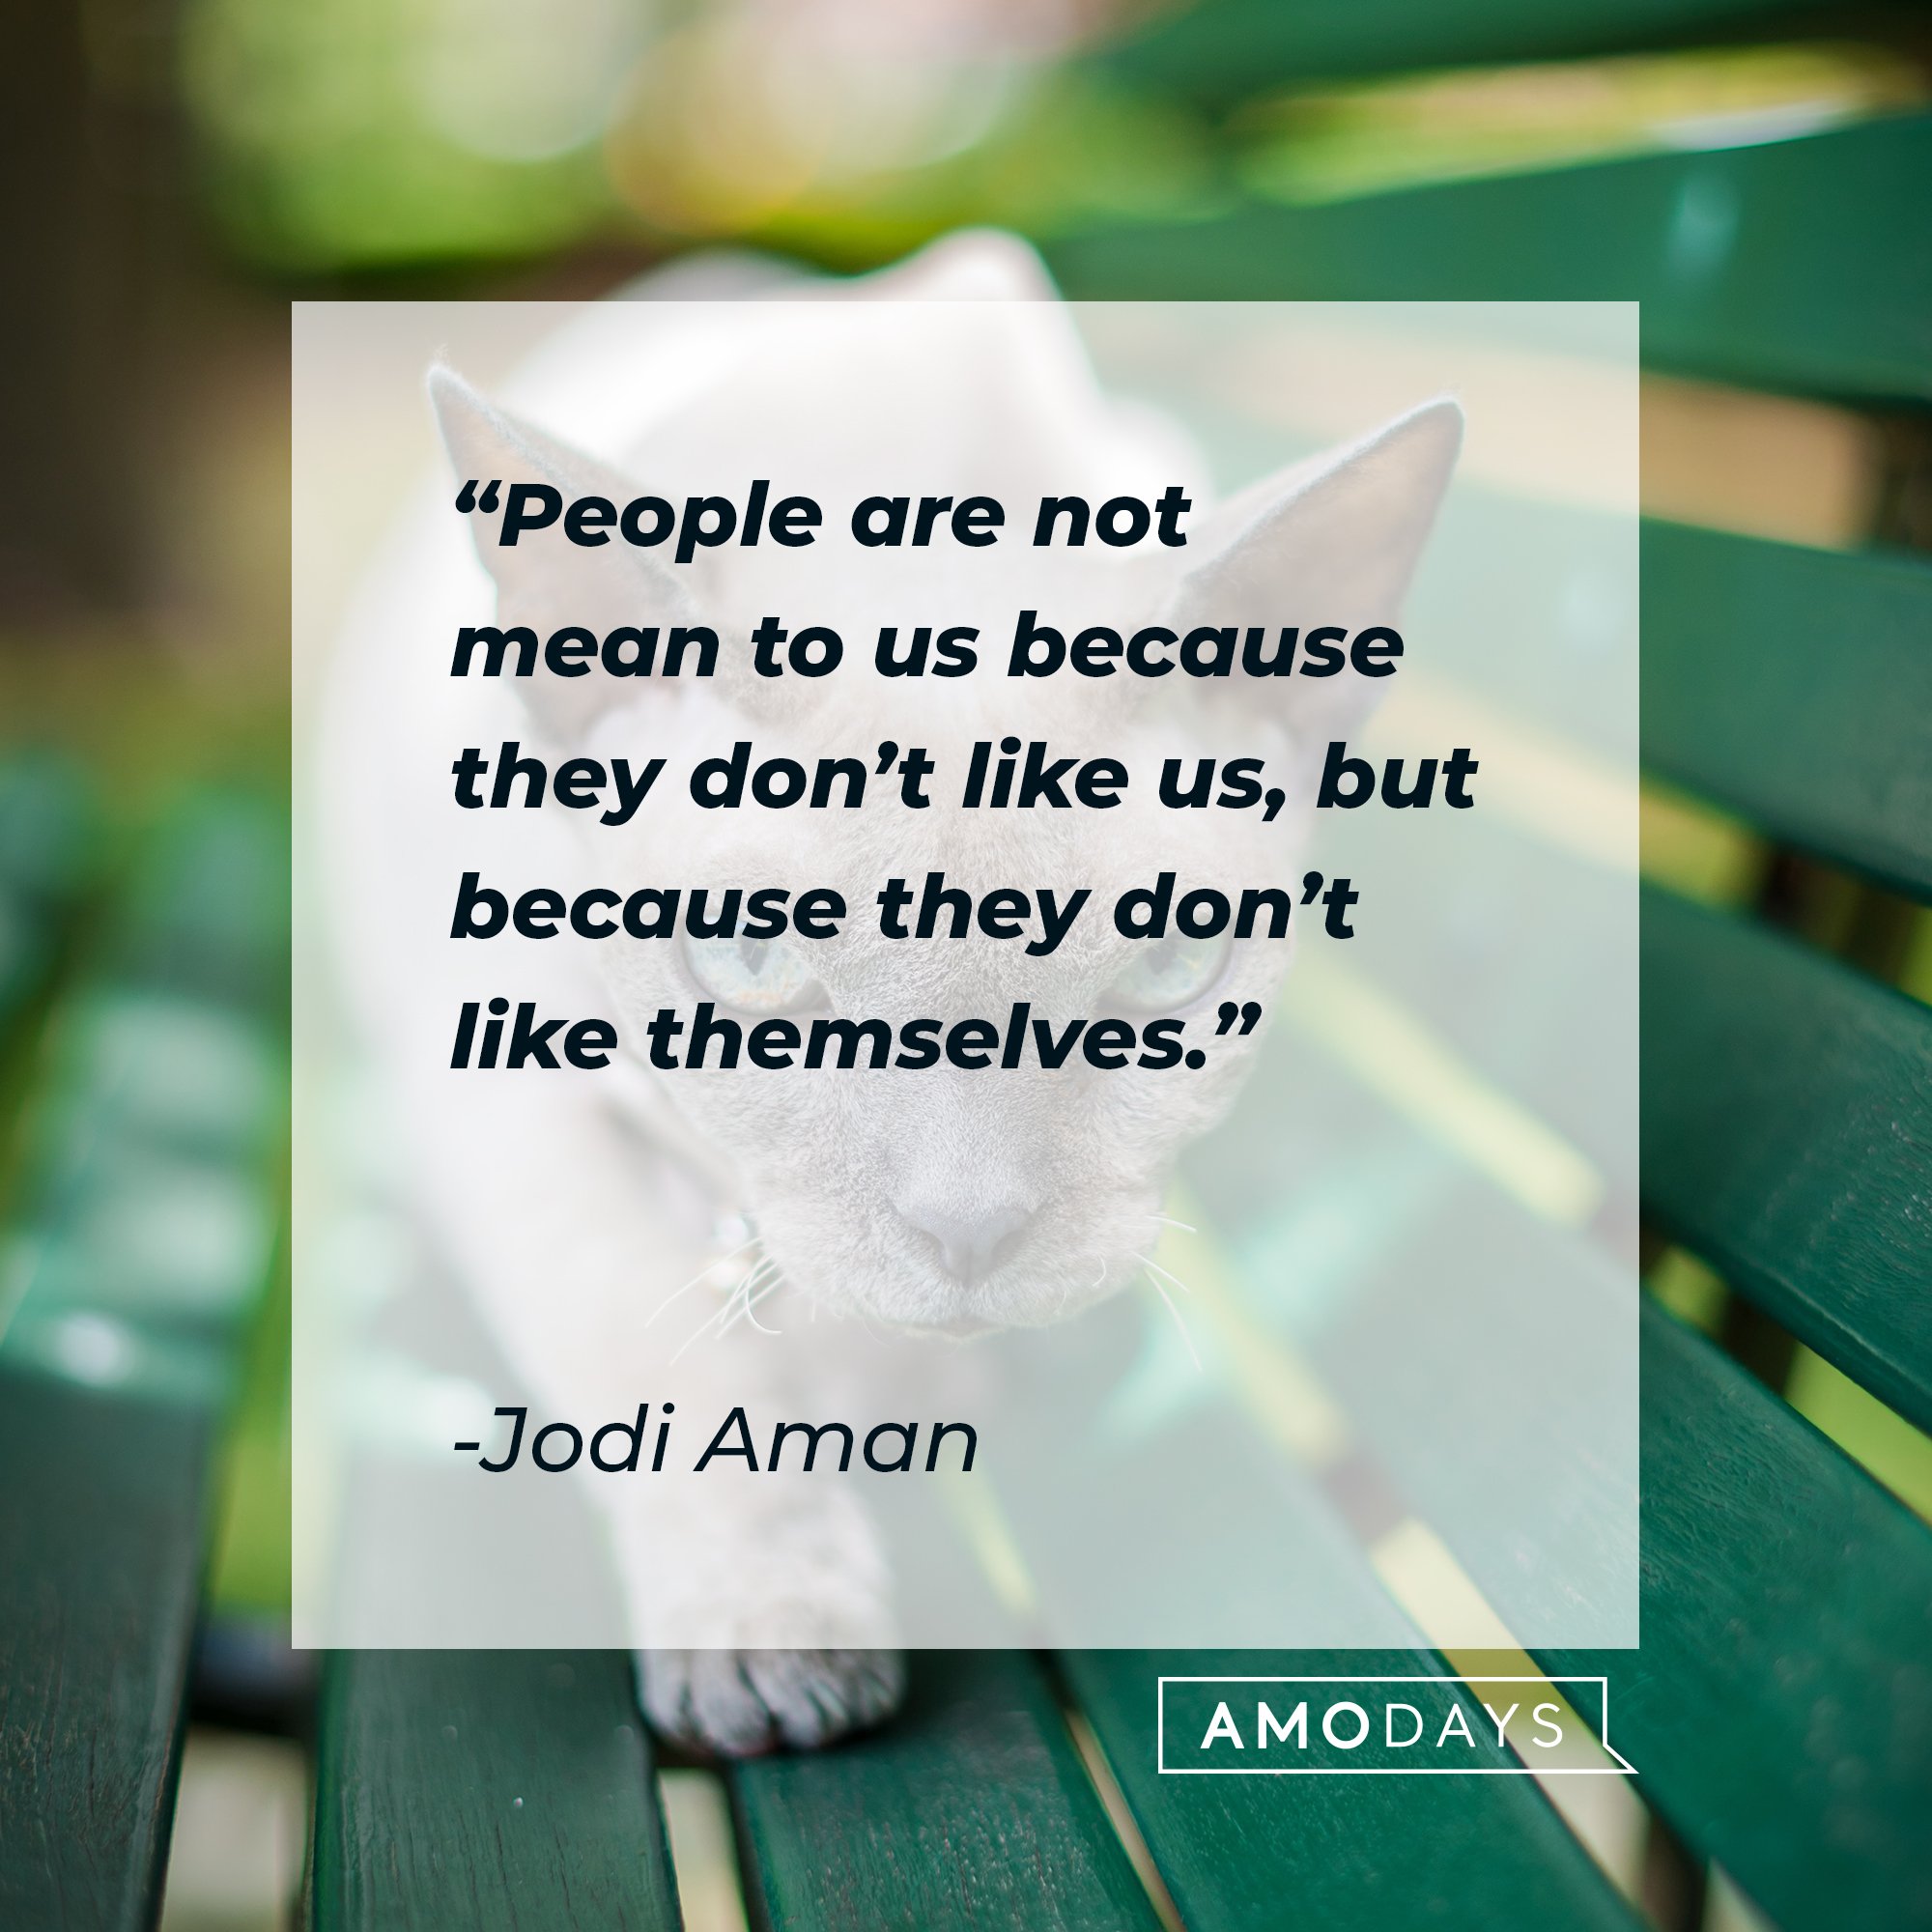 Jodi Aman's quote: "People are not mean to us because they don’t like us, but because they don’t like themselves." | Image: AmoDays